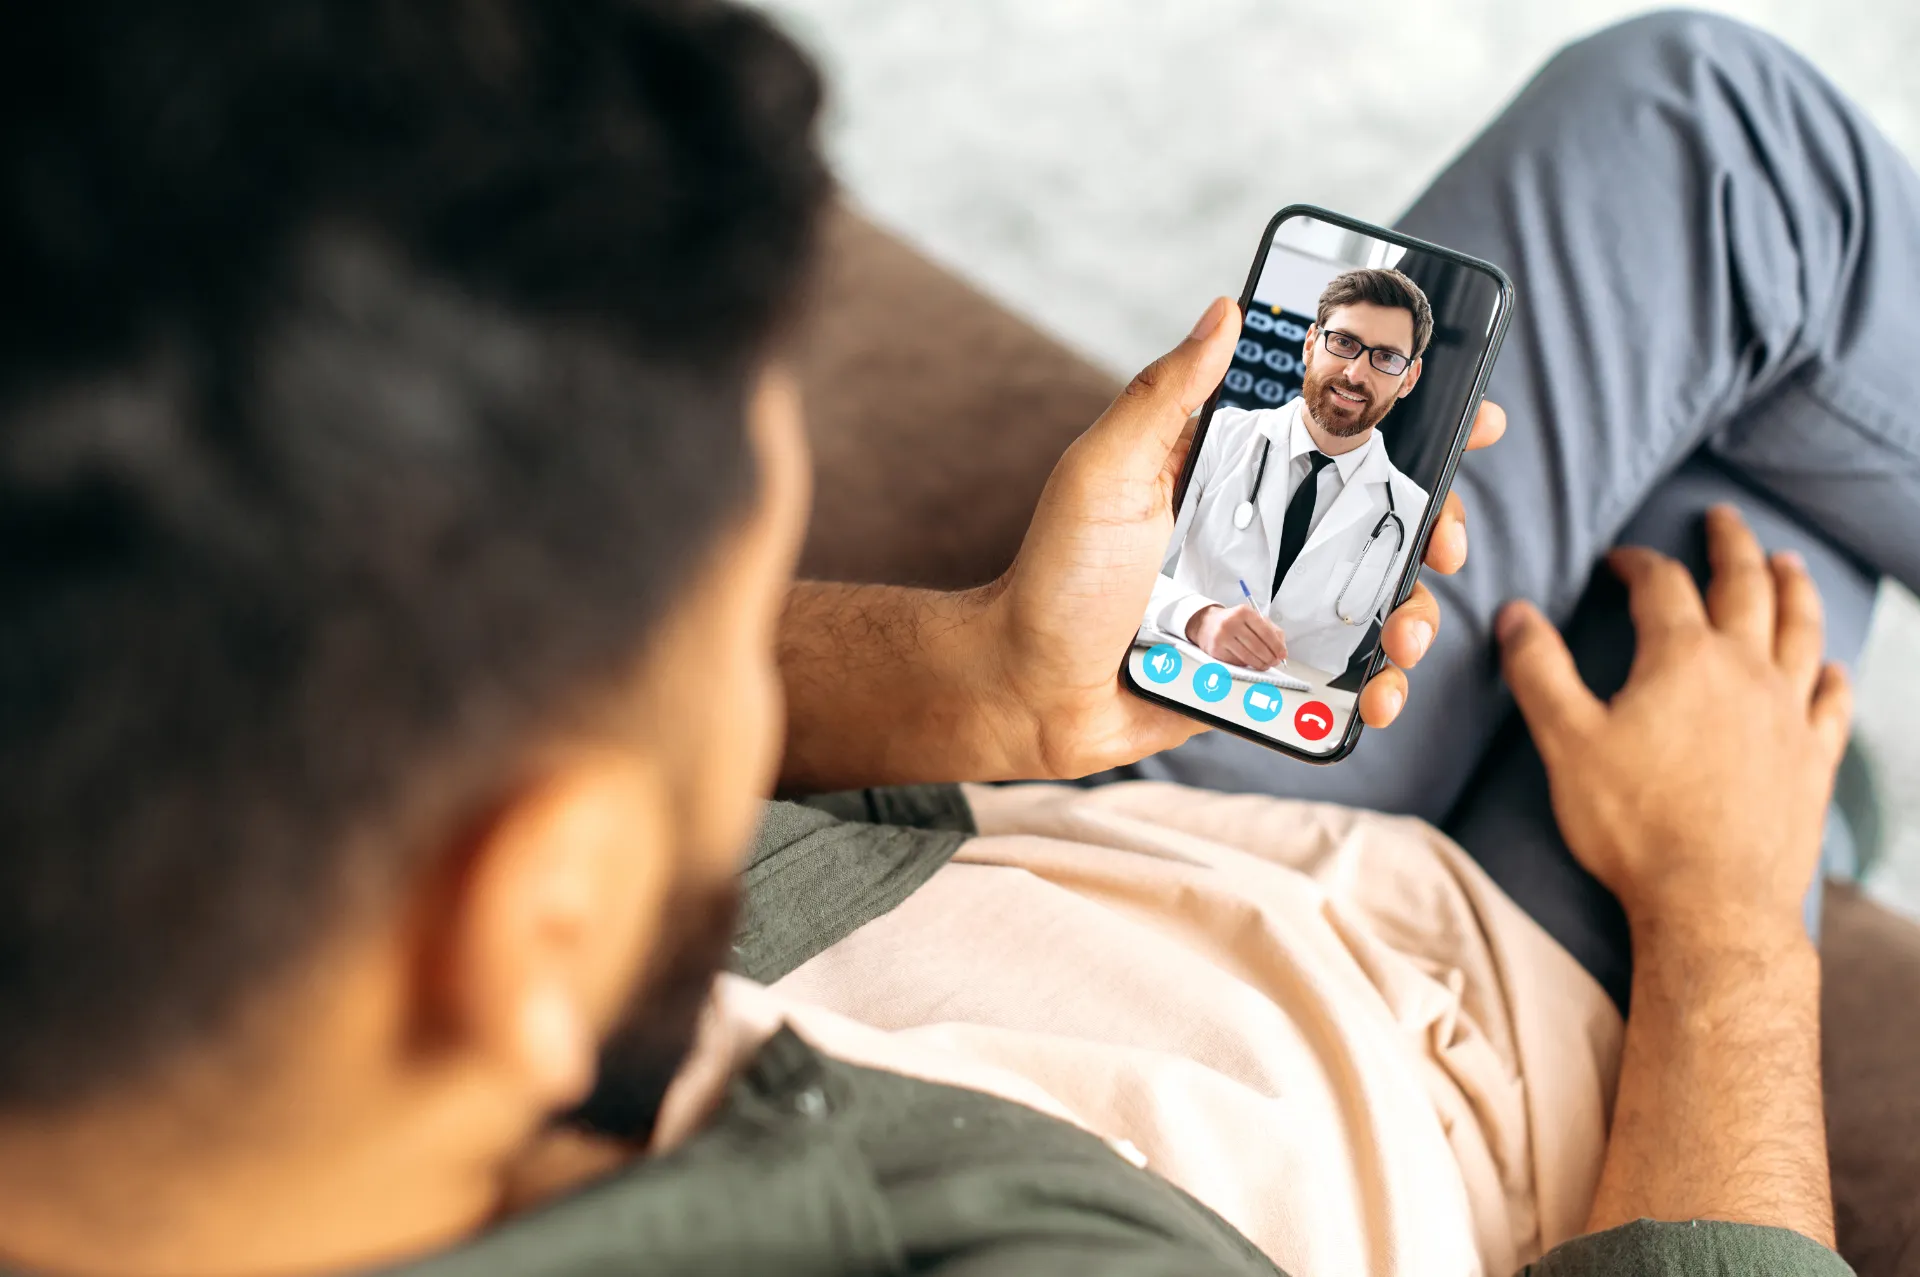 remote-medical-consultation-on-the-phone-screen